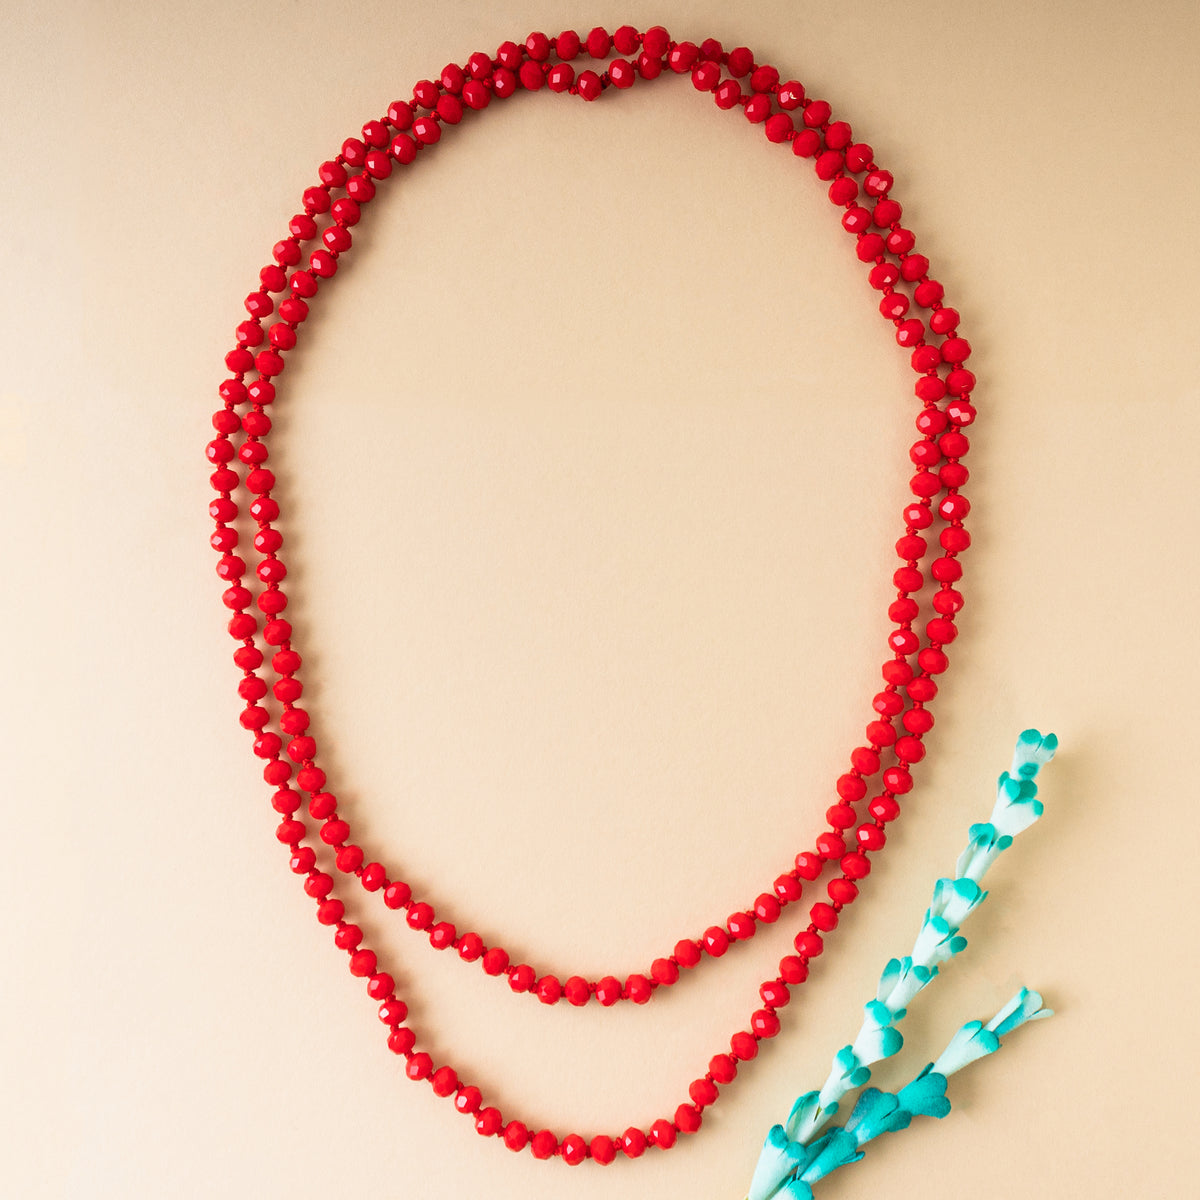 72028-46 - Beaded Necklace - Bright Red